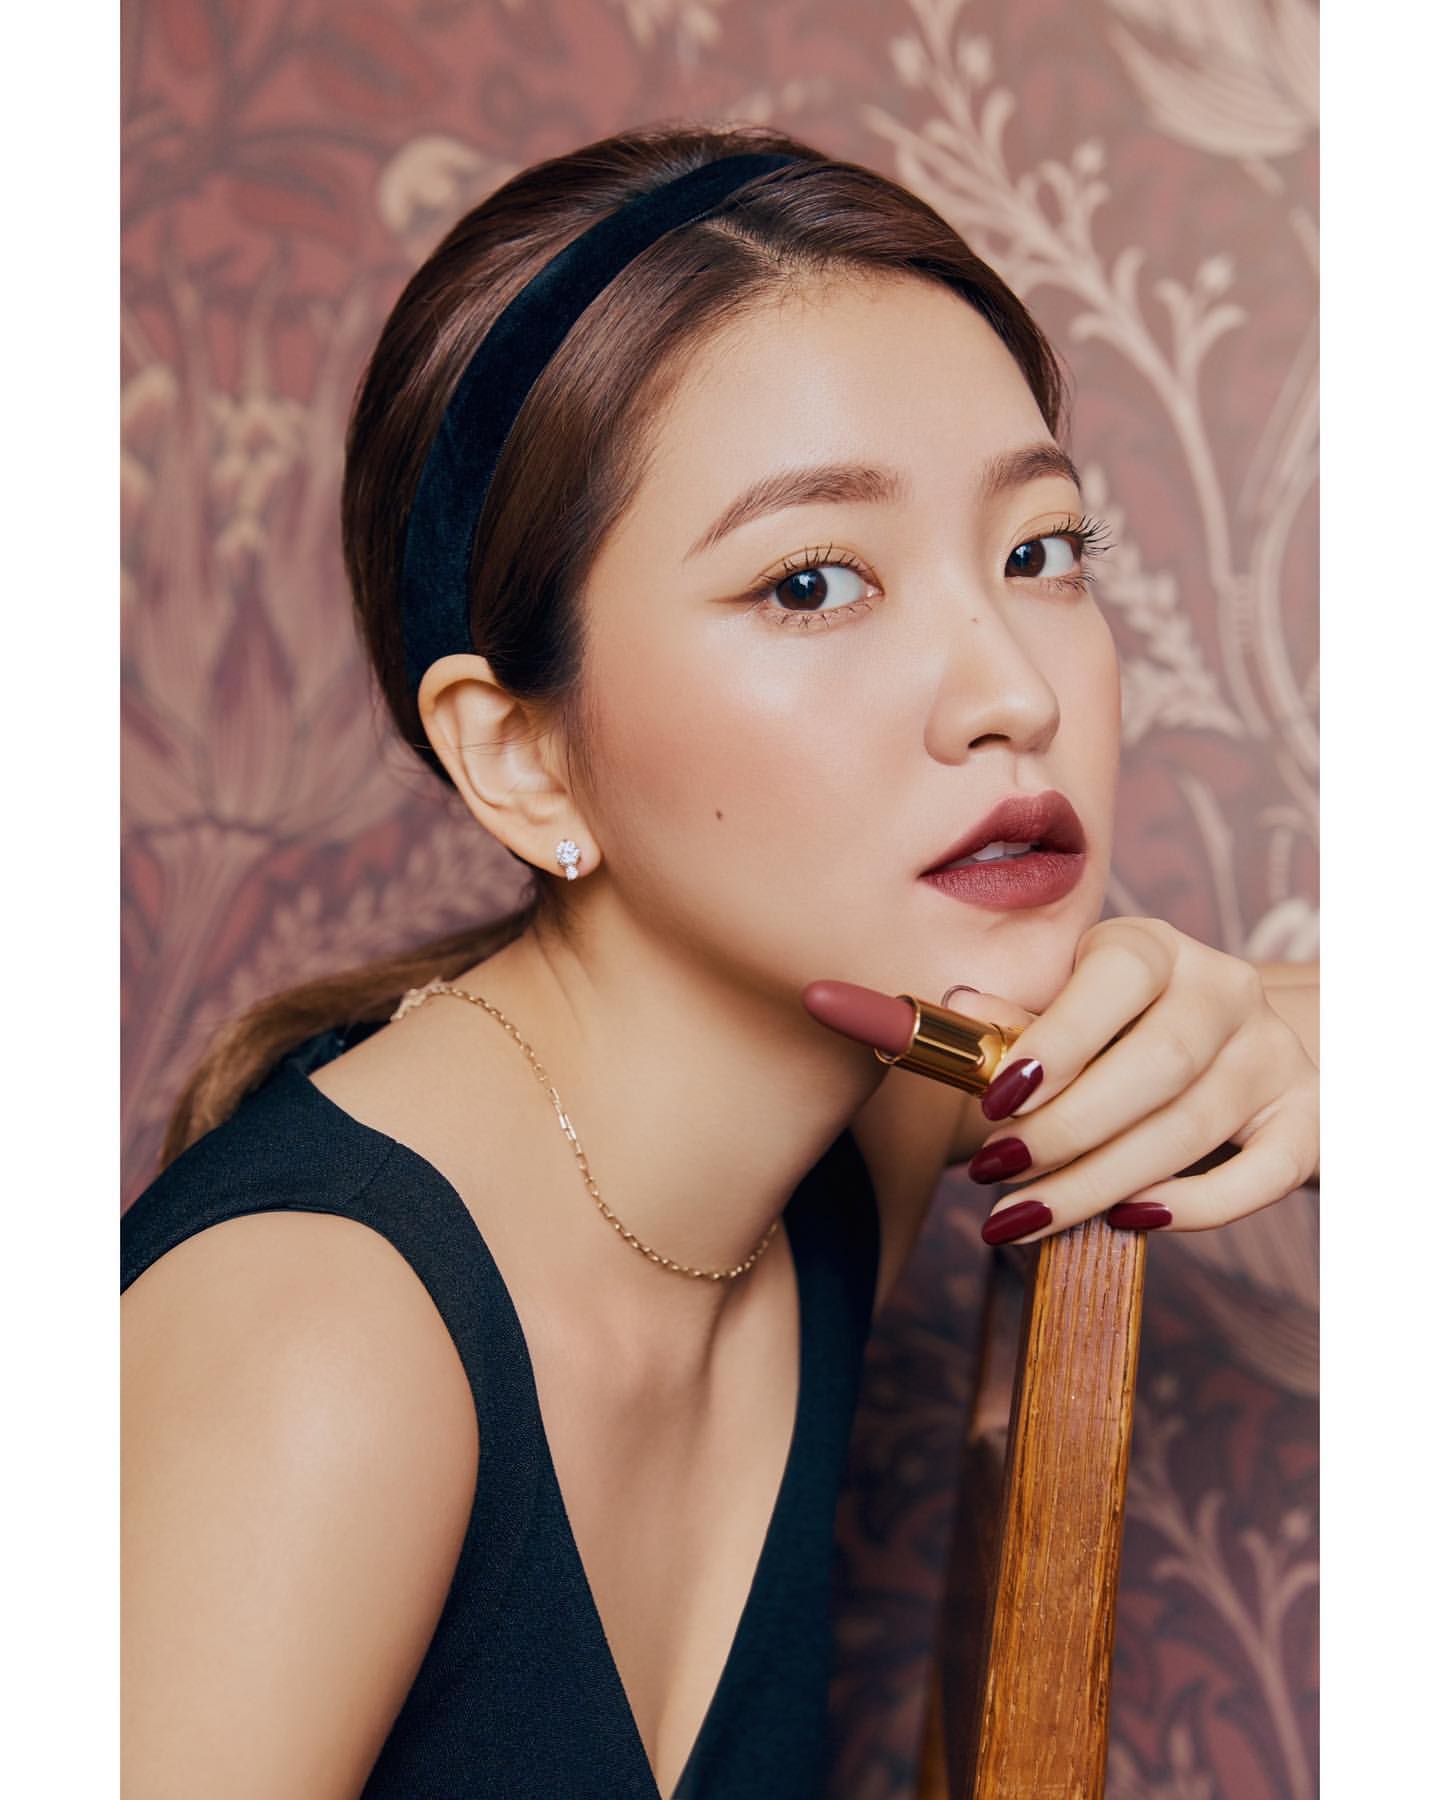 Red Velvet’s Yeri Is A Total Boss Woman As She Shows Off Her New Line Of Lipsticks